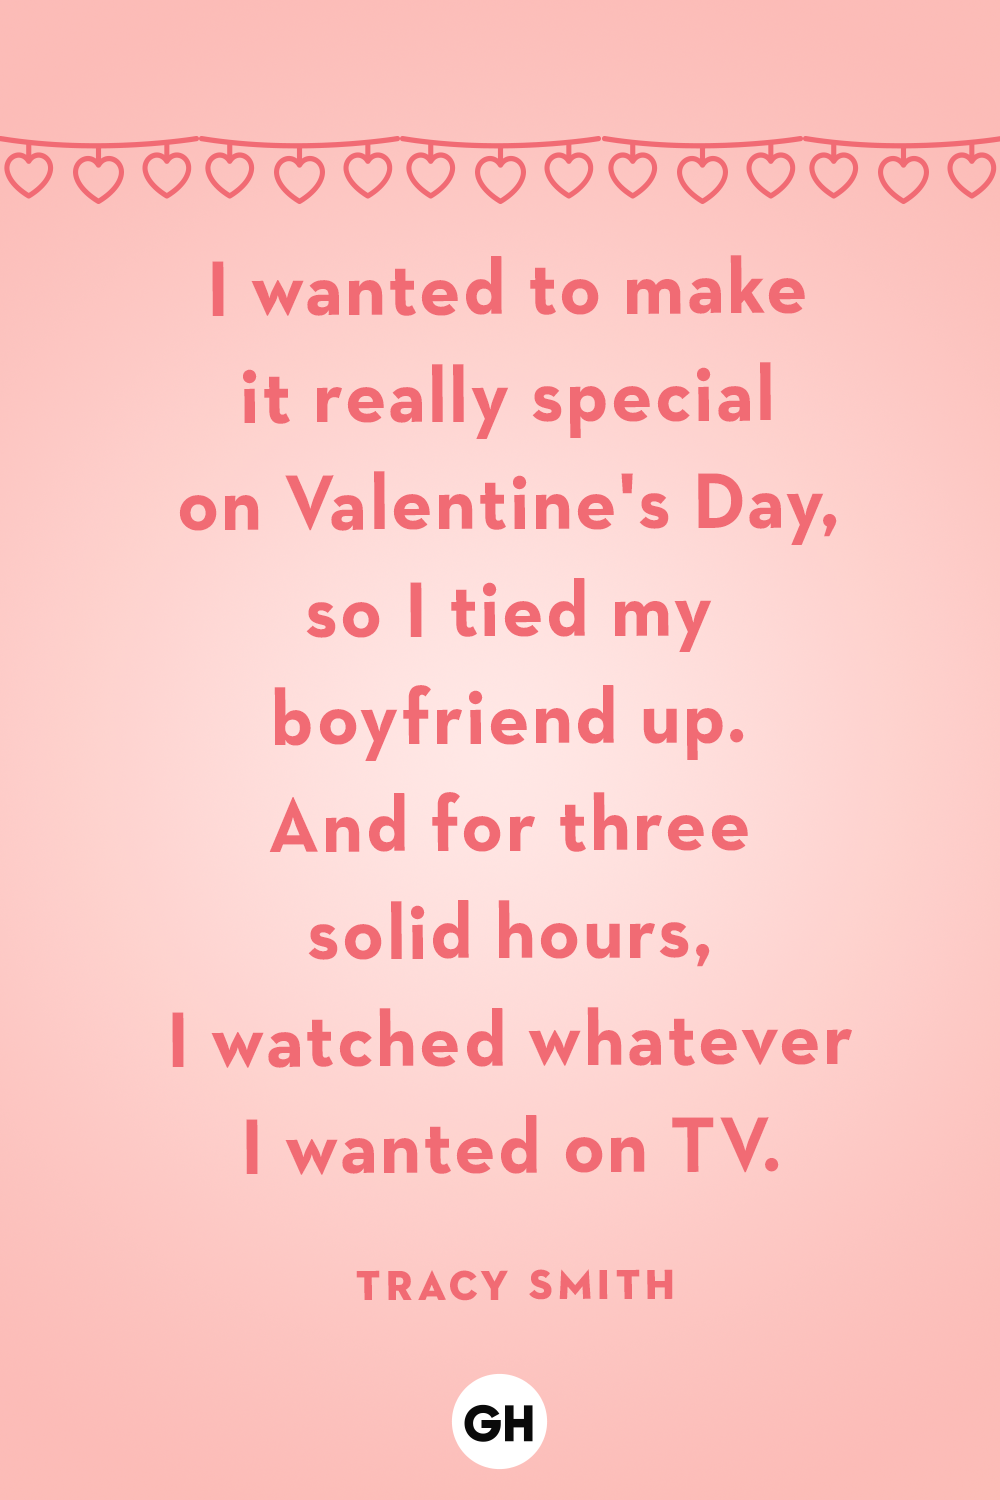 60 Funny Valentine's Day Quotes — Funny V-Day Love Sayings